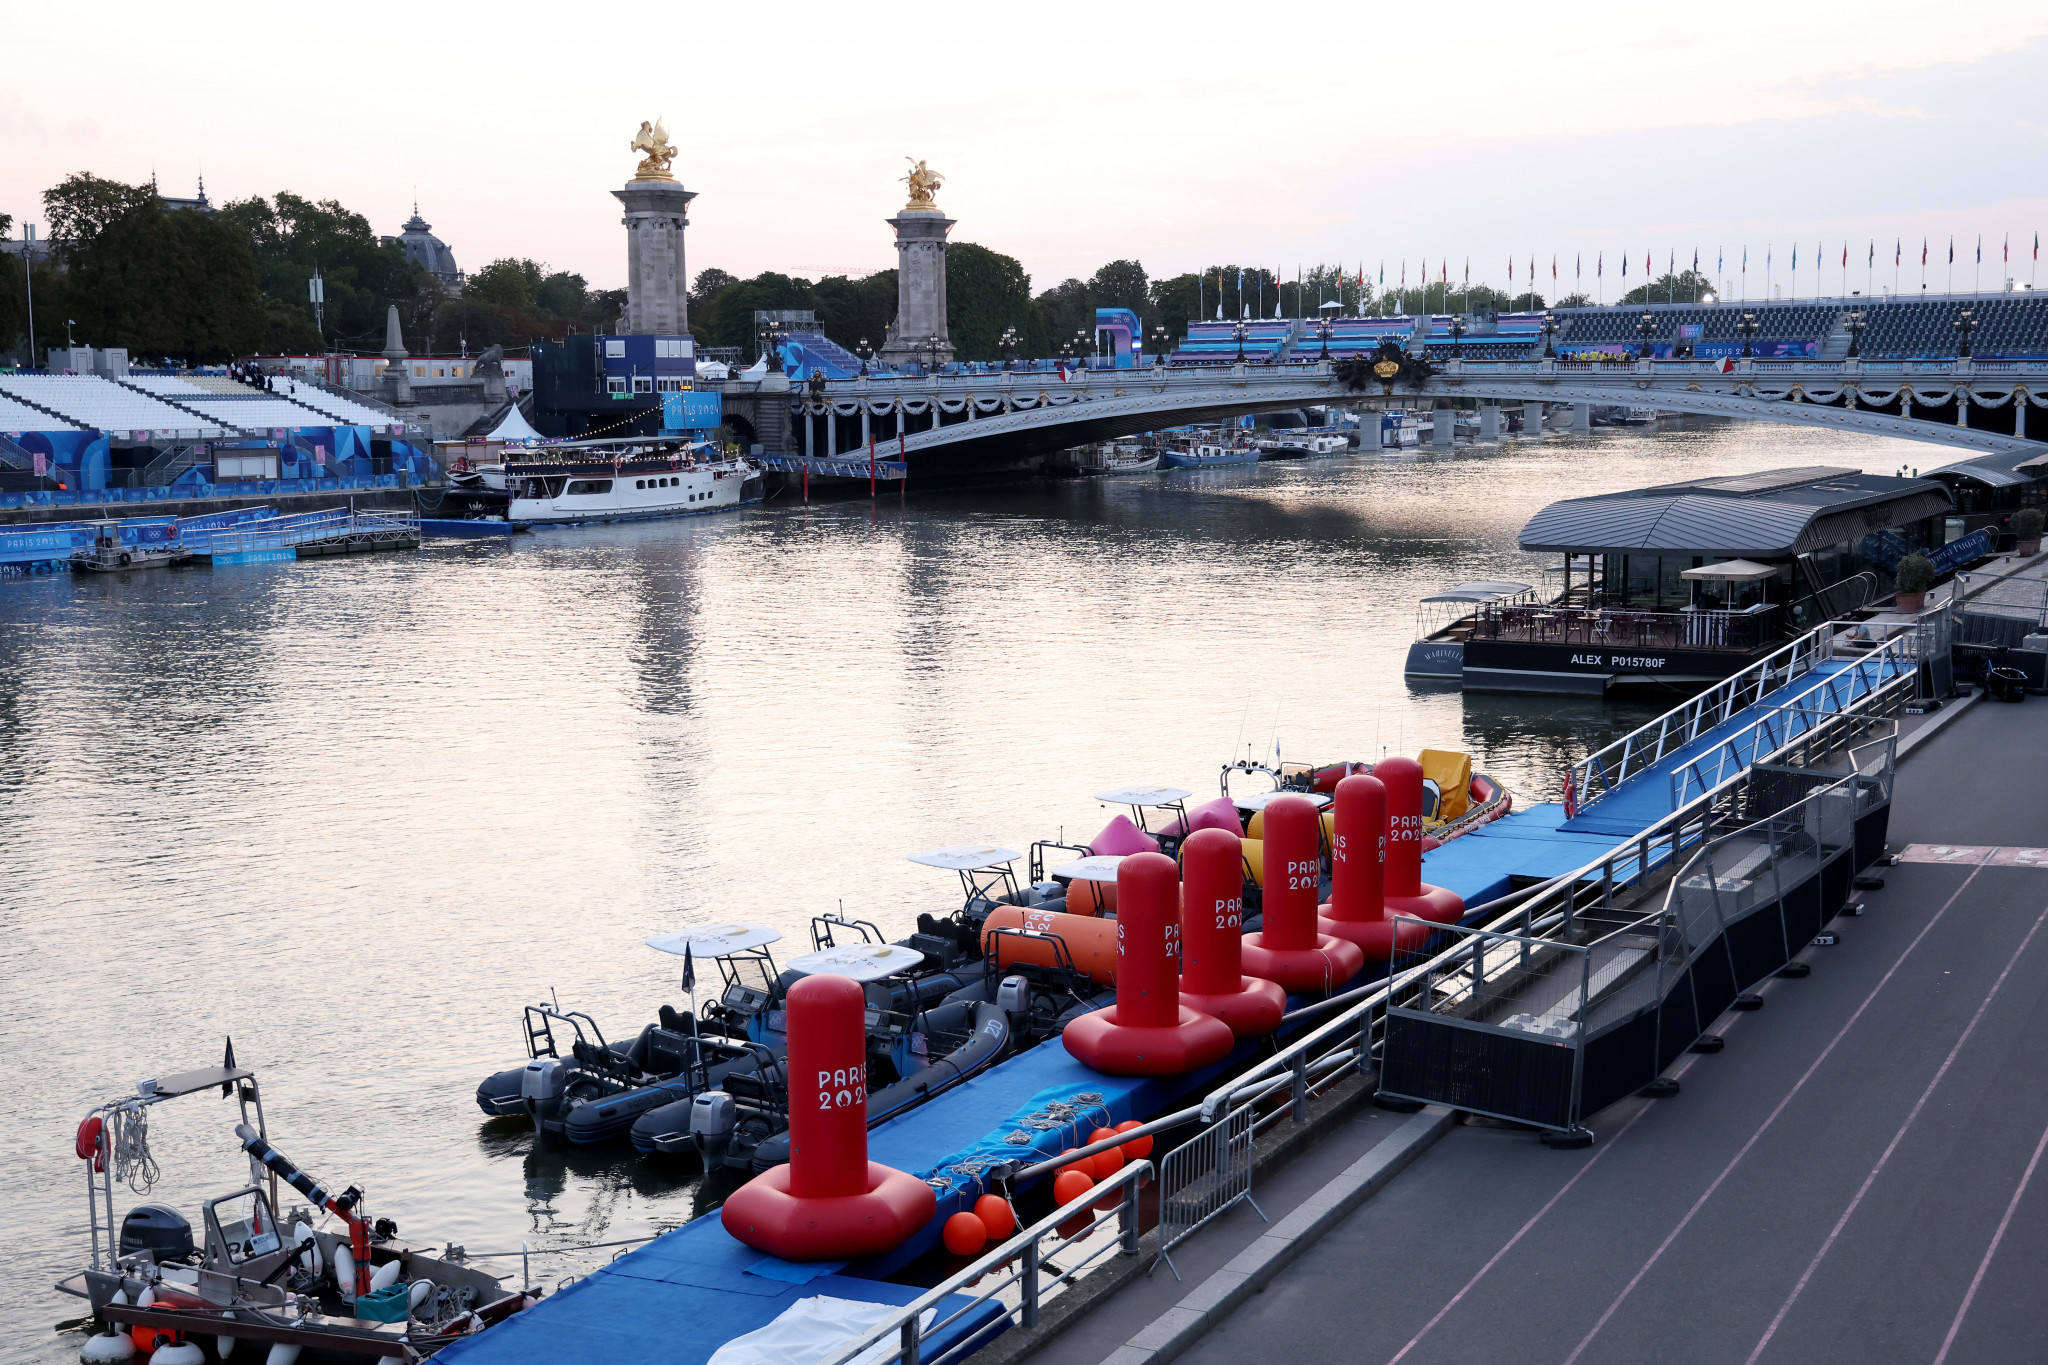 The Seine River near where the start of the men's triathlon race was to place but was postponed due to high levels of E. coli in the water. GETTY IMAGES